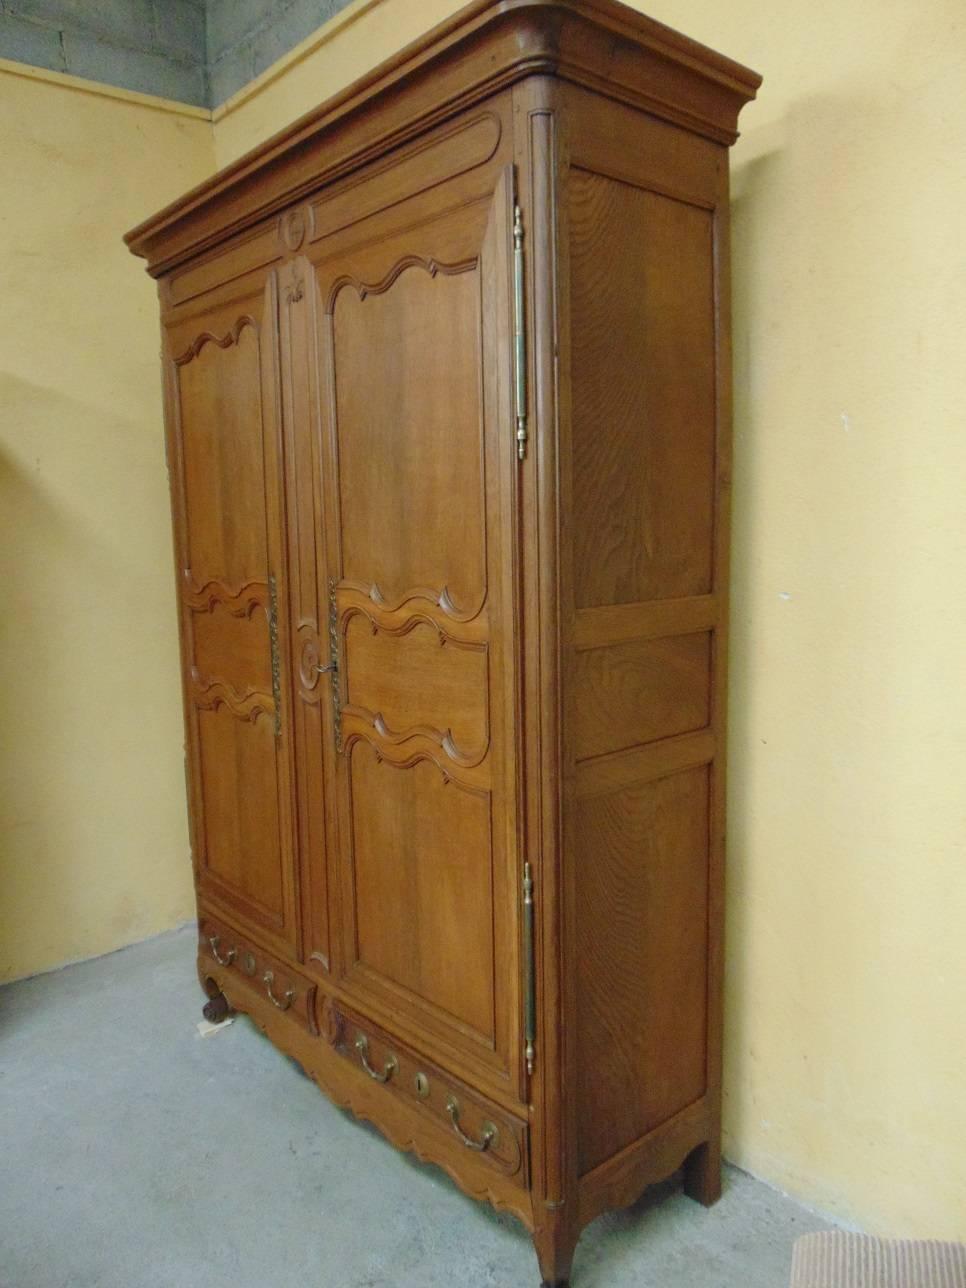 A good oak armoire from the Burgundy area of France with fine mouldings in the Louis XV style, circa 1840.